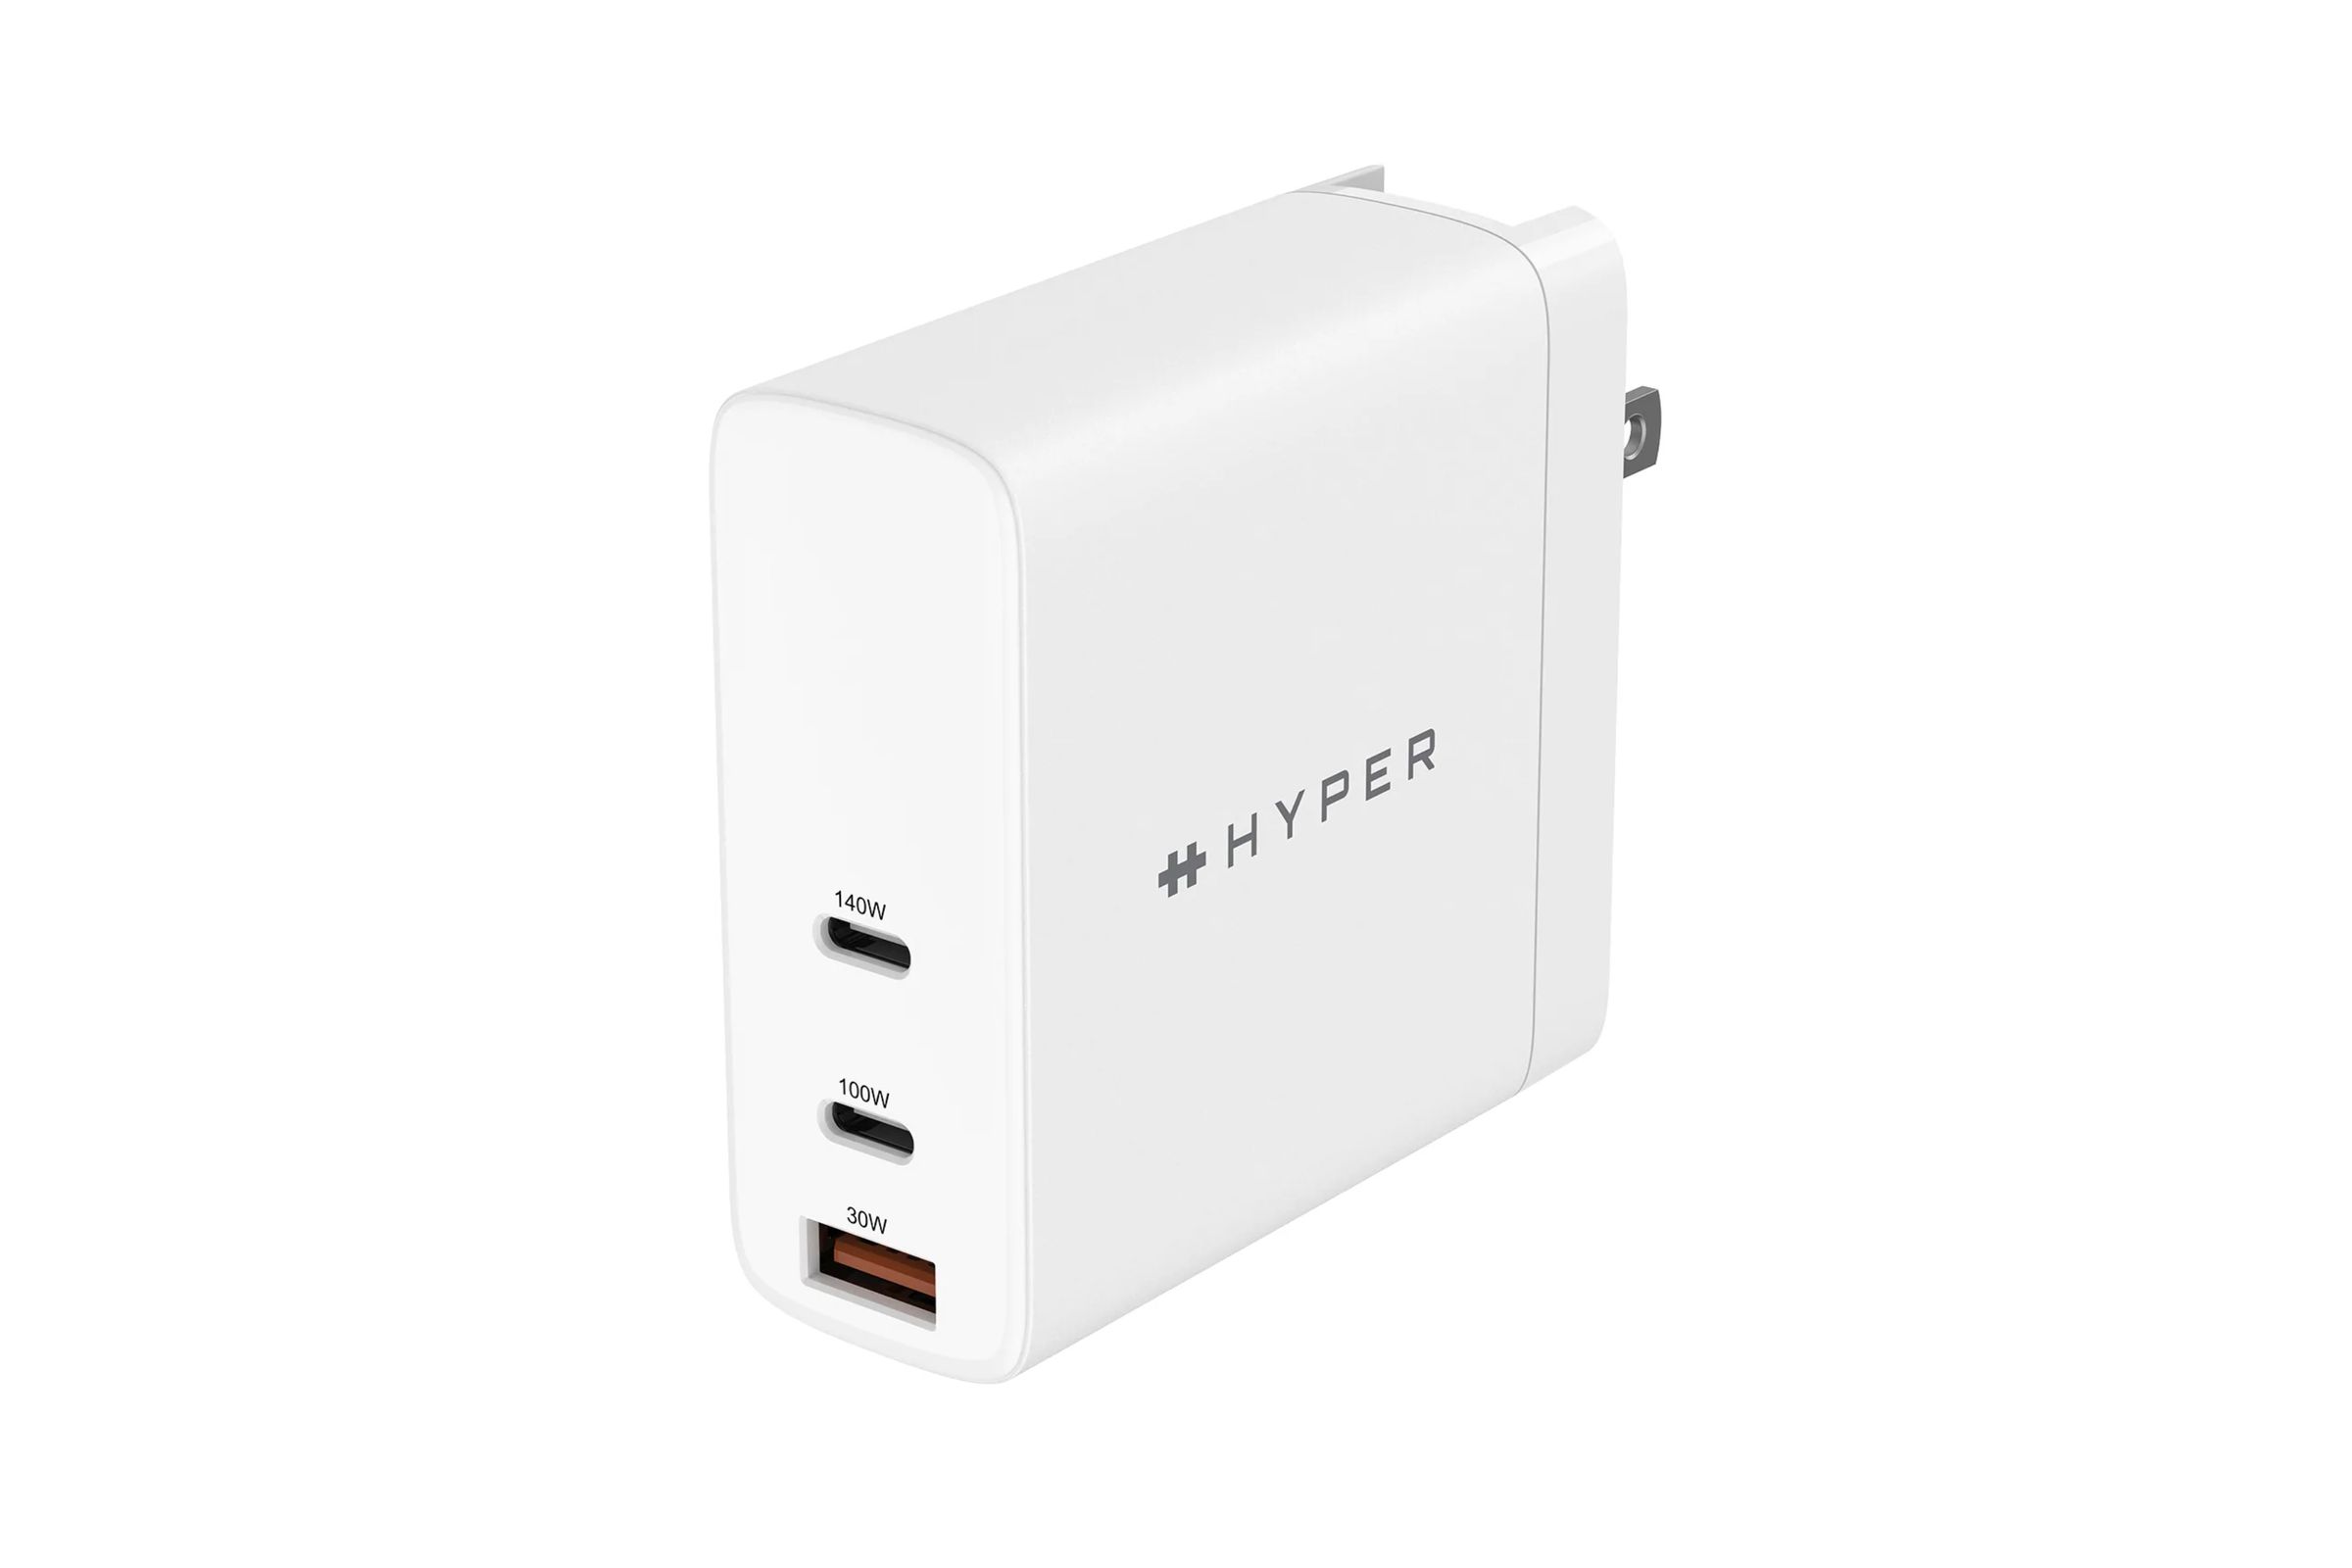 Floating in white space is a white colored charge brick, almost square in shape, that has the word Hyper printed on the side. There's a USB-C port labeled 140W, another under it with 100W, and a final full USB-A port with a 30W label.